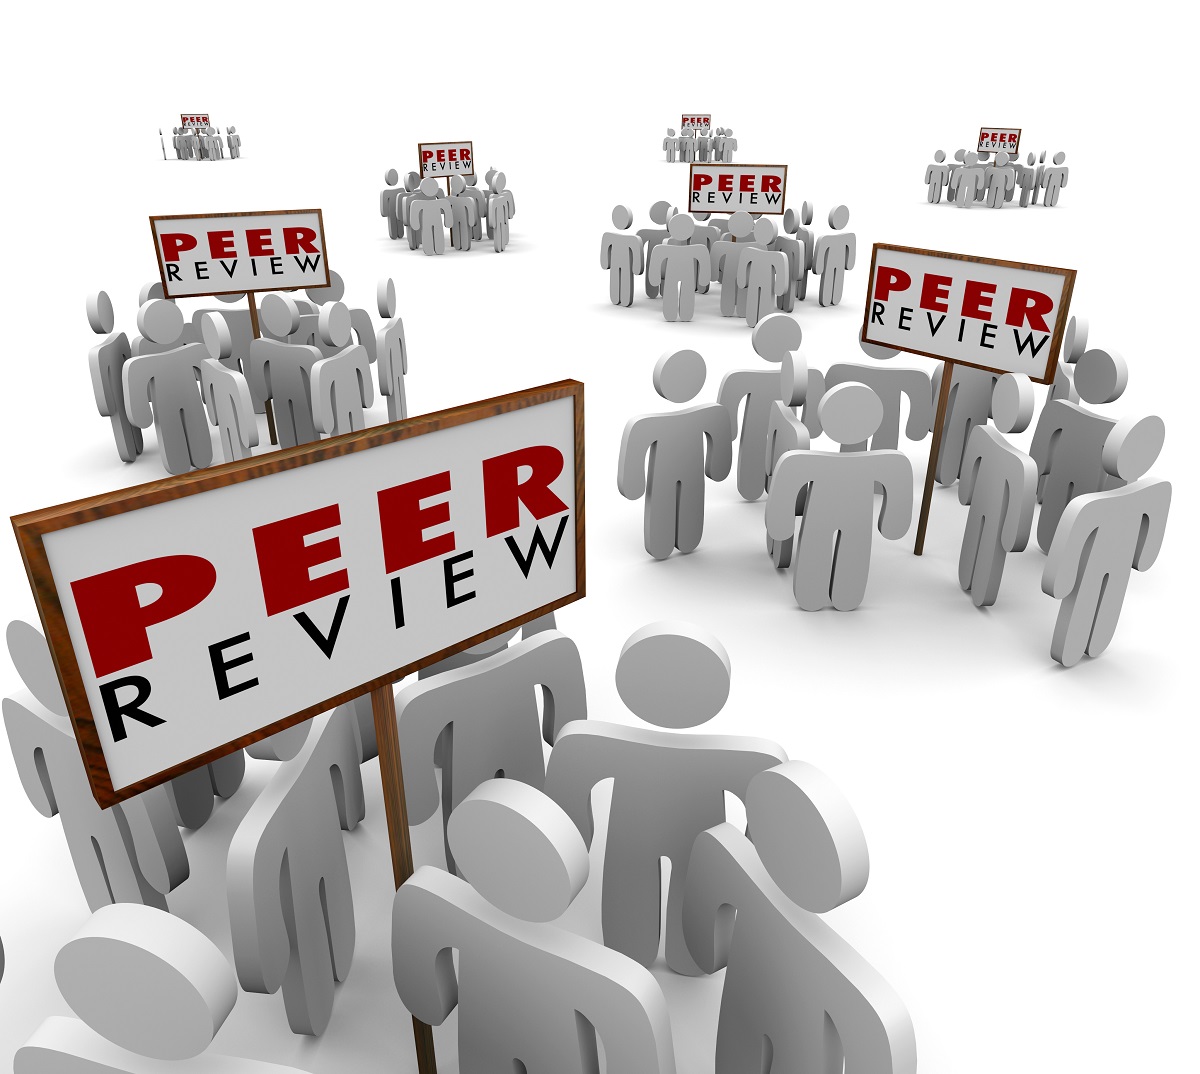 How To Respond When a Journal Editor Asks You To Do a Peer Review